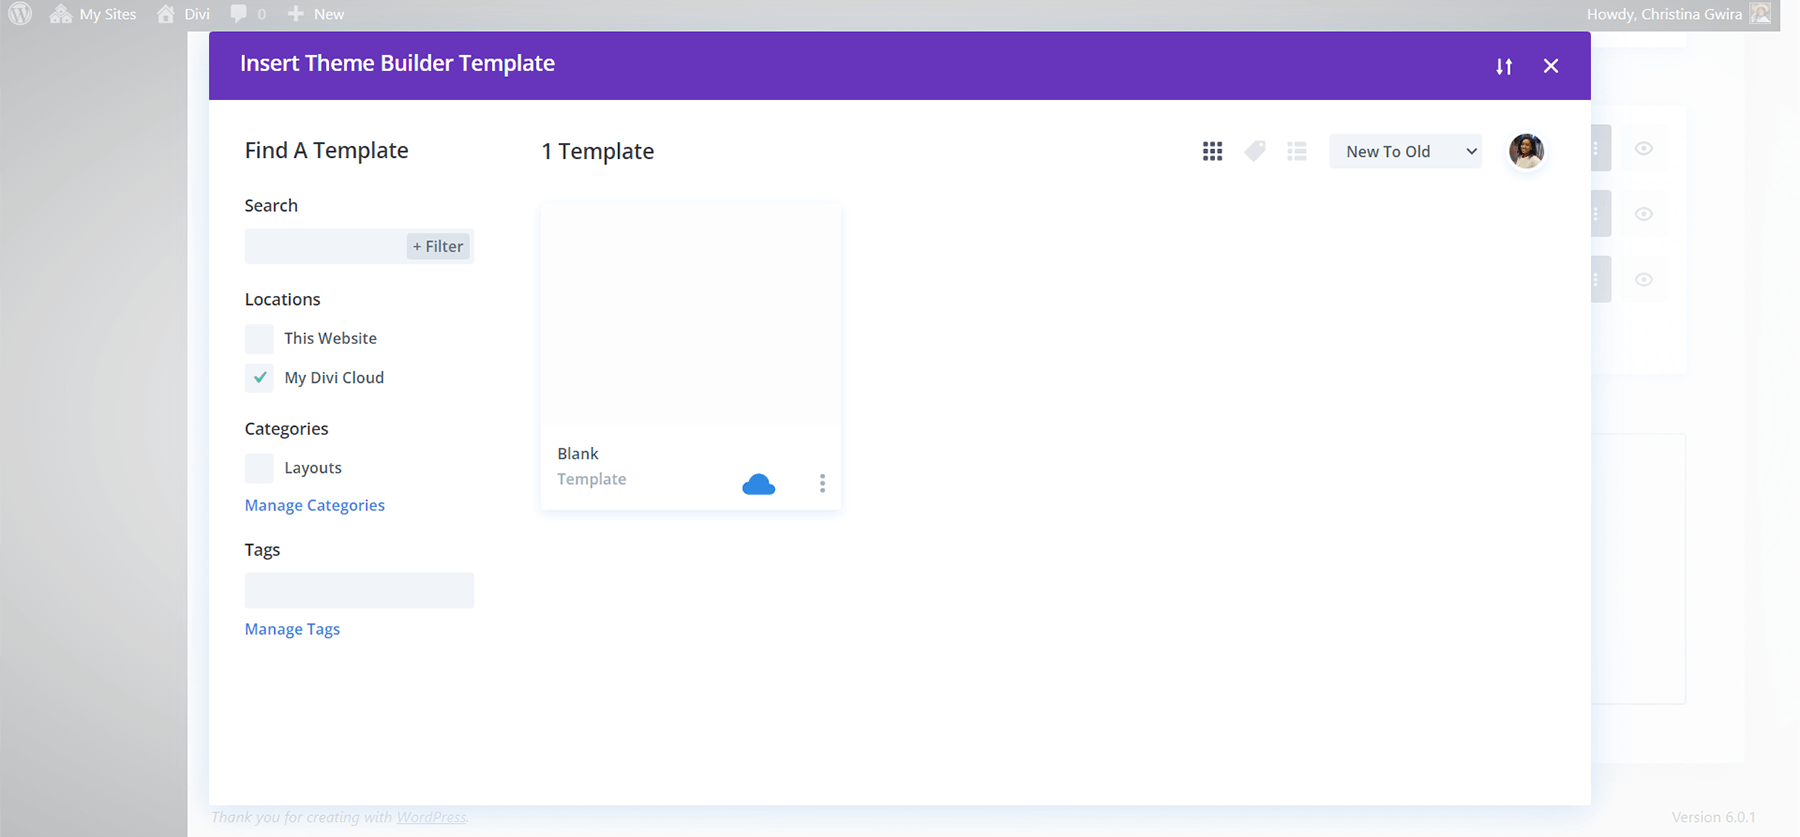 Inserting templates into the Divi Theme Builder